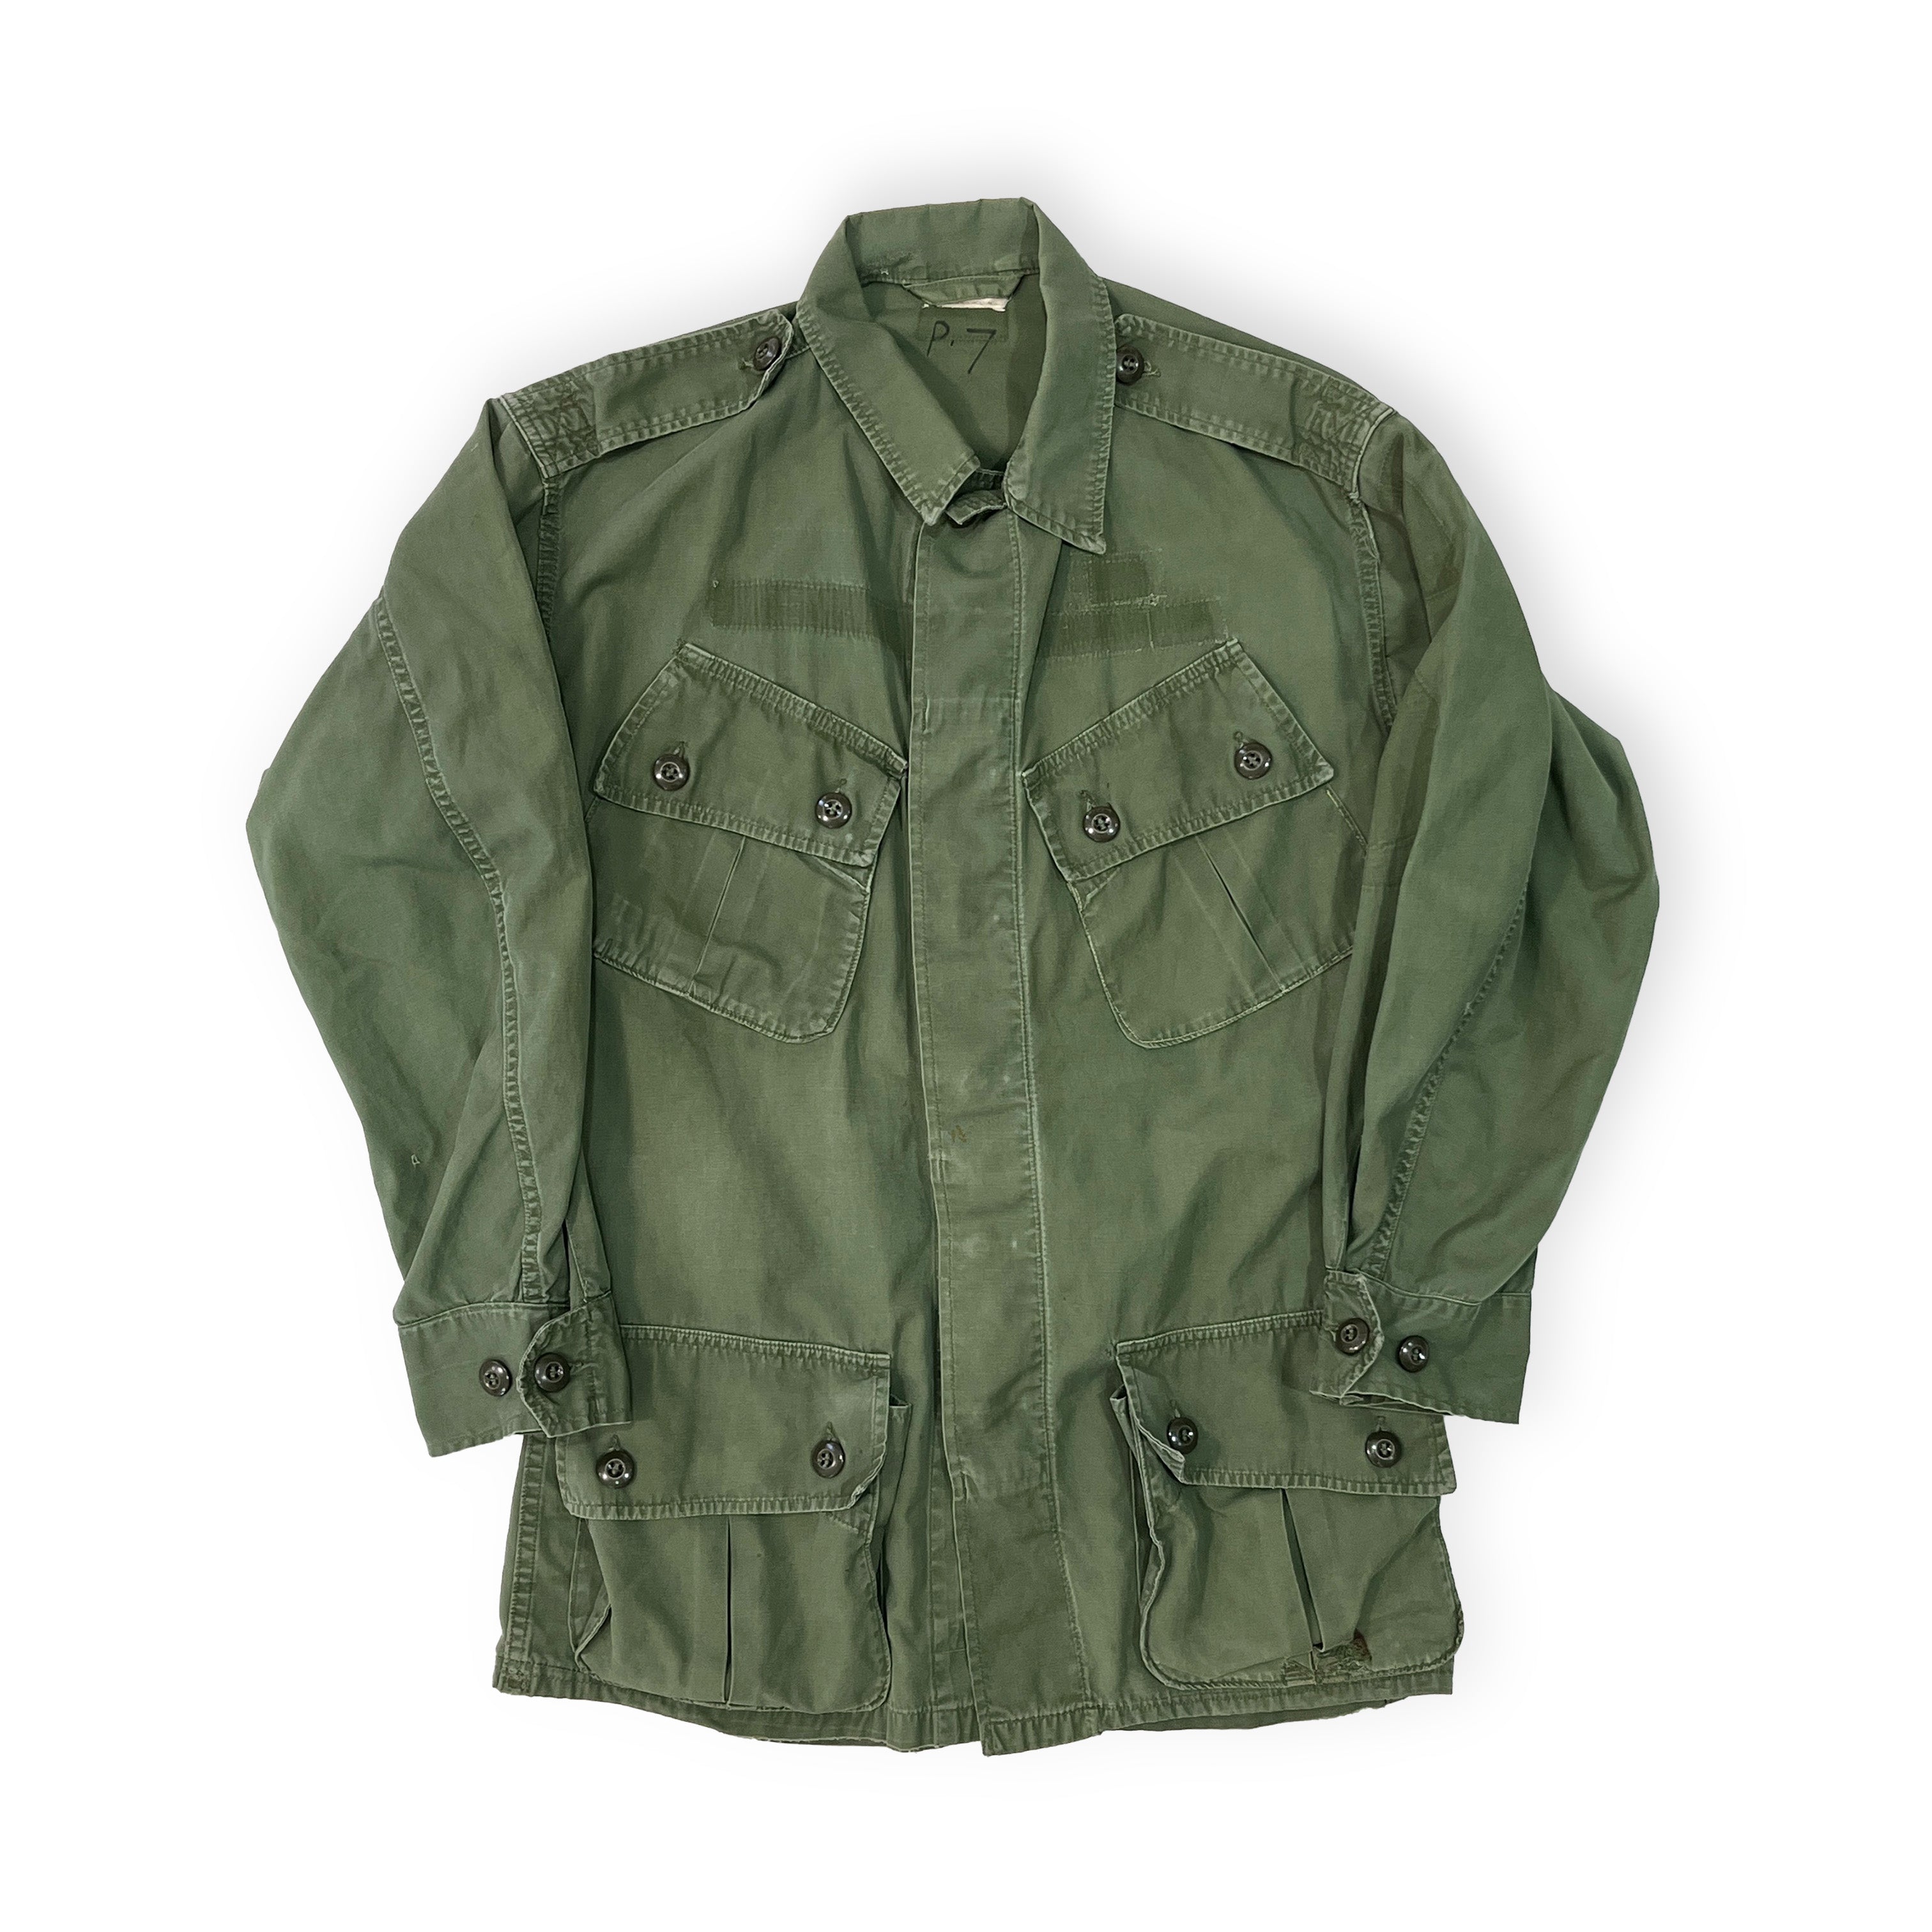 63's U.S.ARMY ジャングルファティーグJKT 1st TYPE Size (S-R)